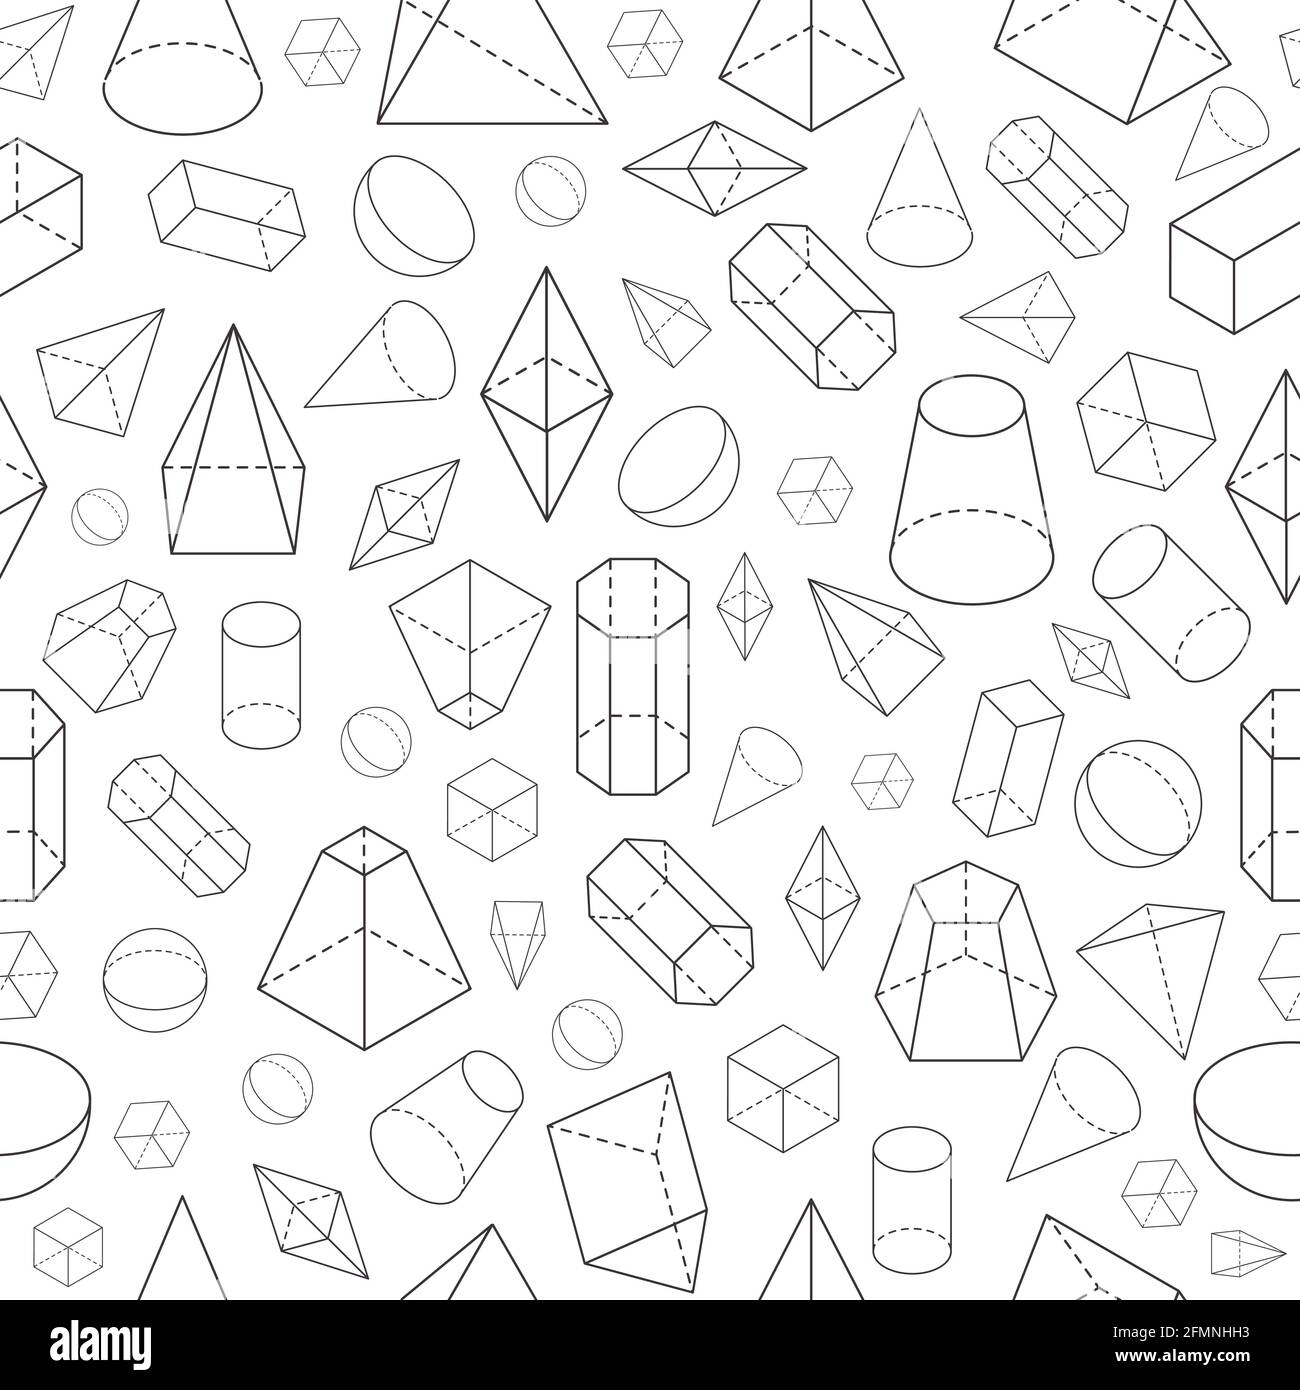 Isometric 3d shapes seamless pattern. Geometric math wireframe objects. Pyramid, prism and sphere, cone and cube. Vector school texture. Geometry education with outlined forms and objects Stock Vector